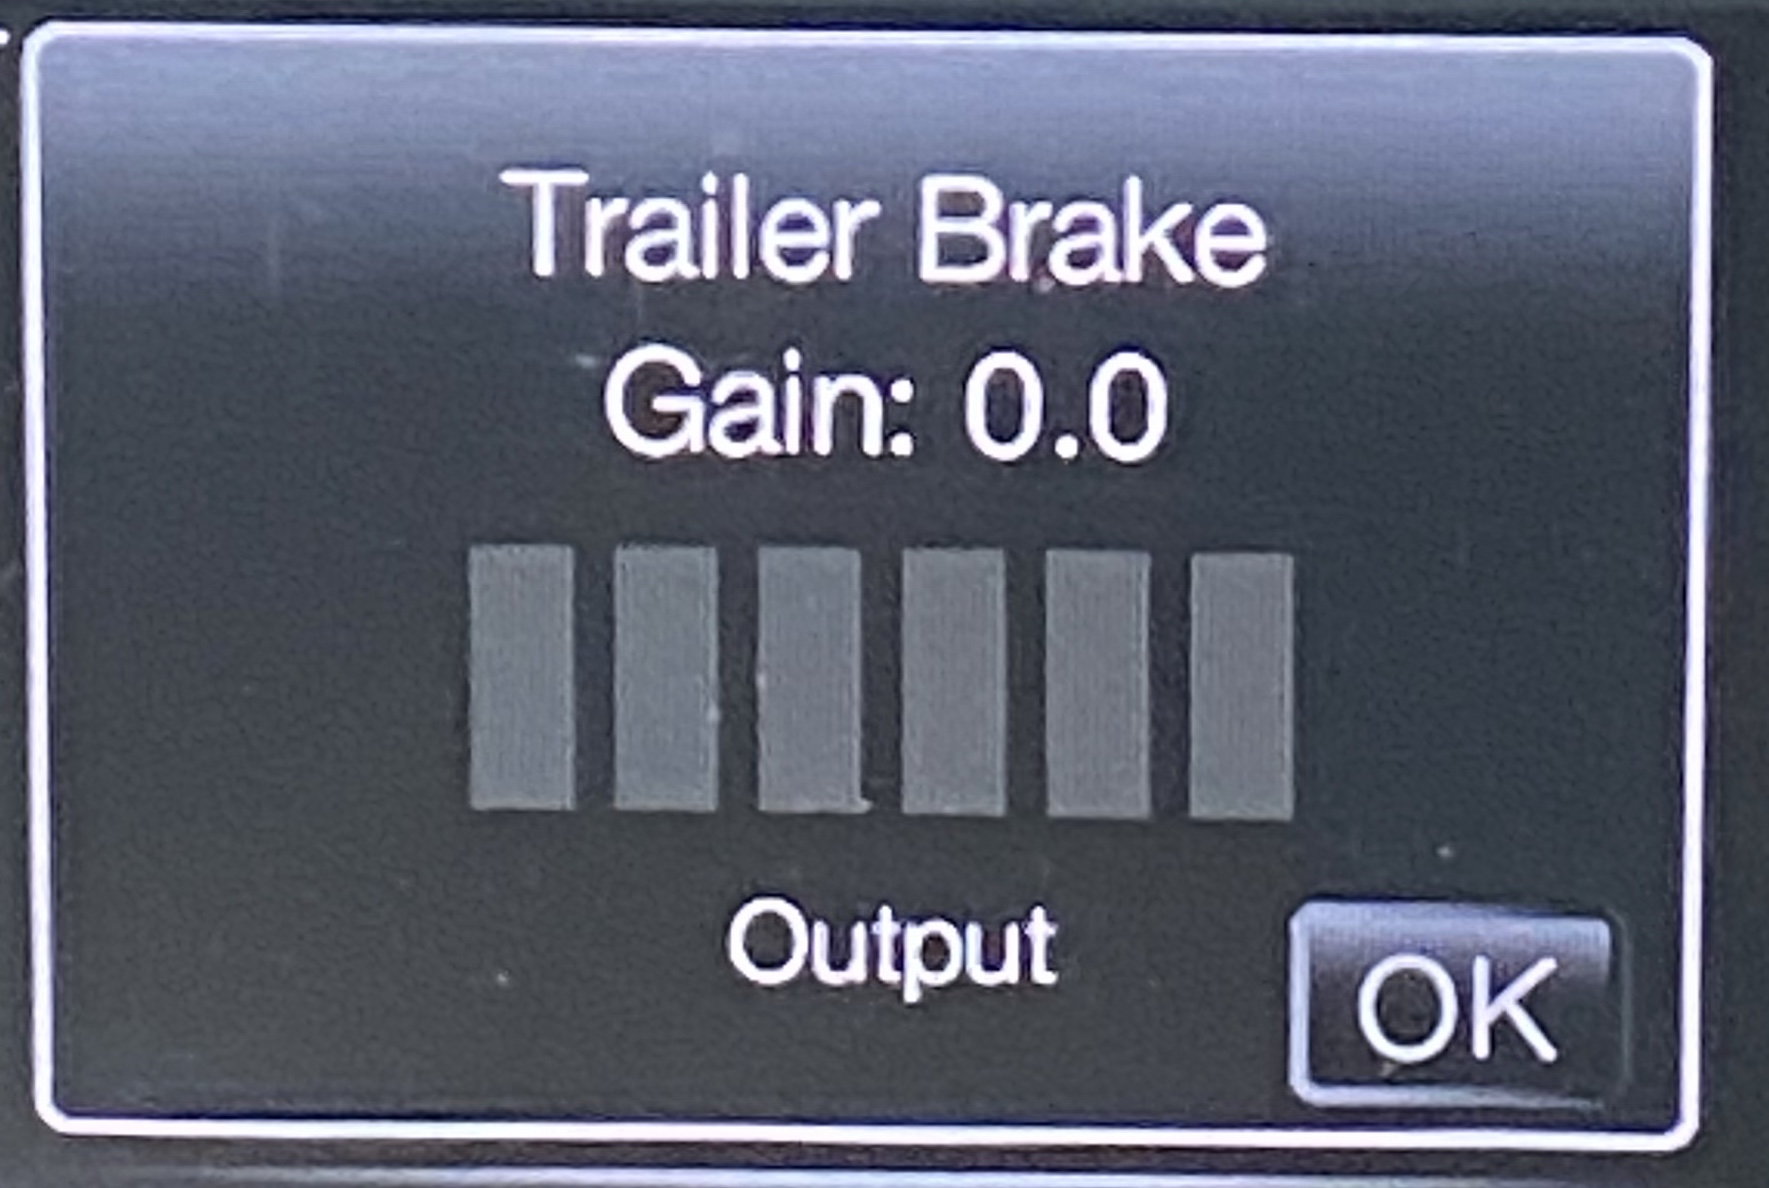 2017 Brake Controller Gain Does Not Work Properly - Ford F150 Forum 2017 Ford F350 Trailer Brakes Not Working